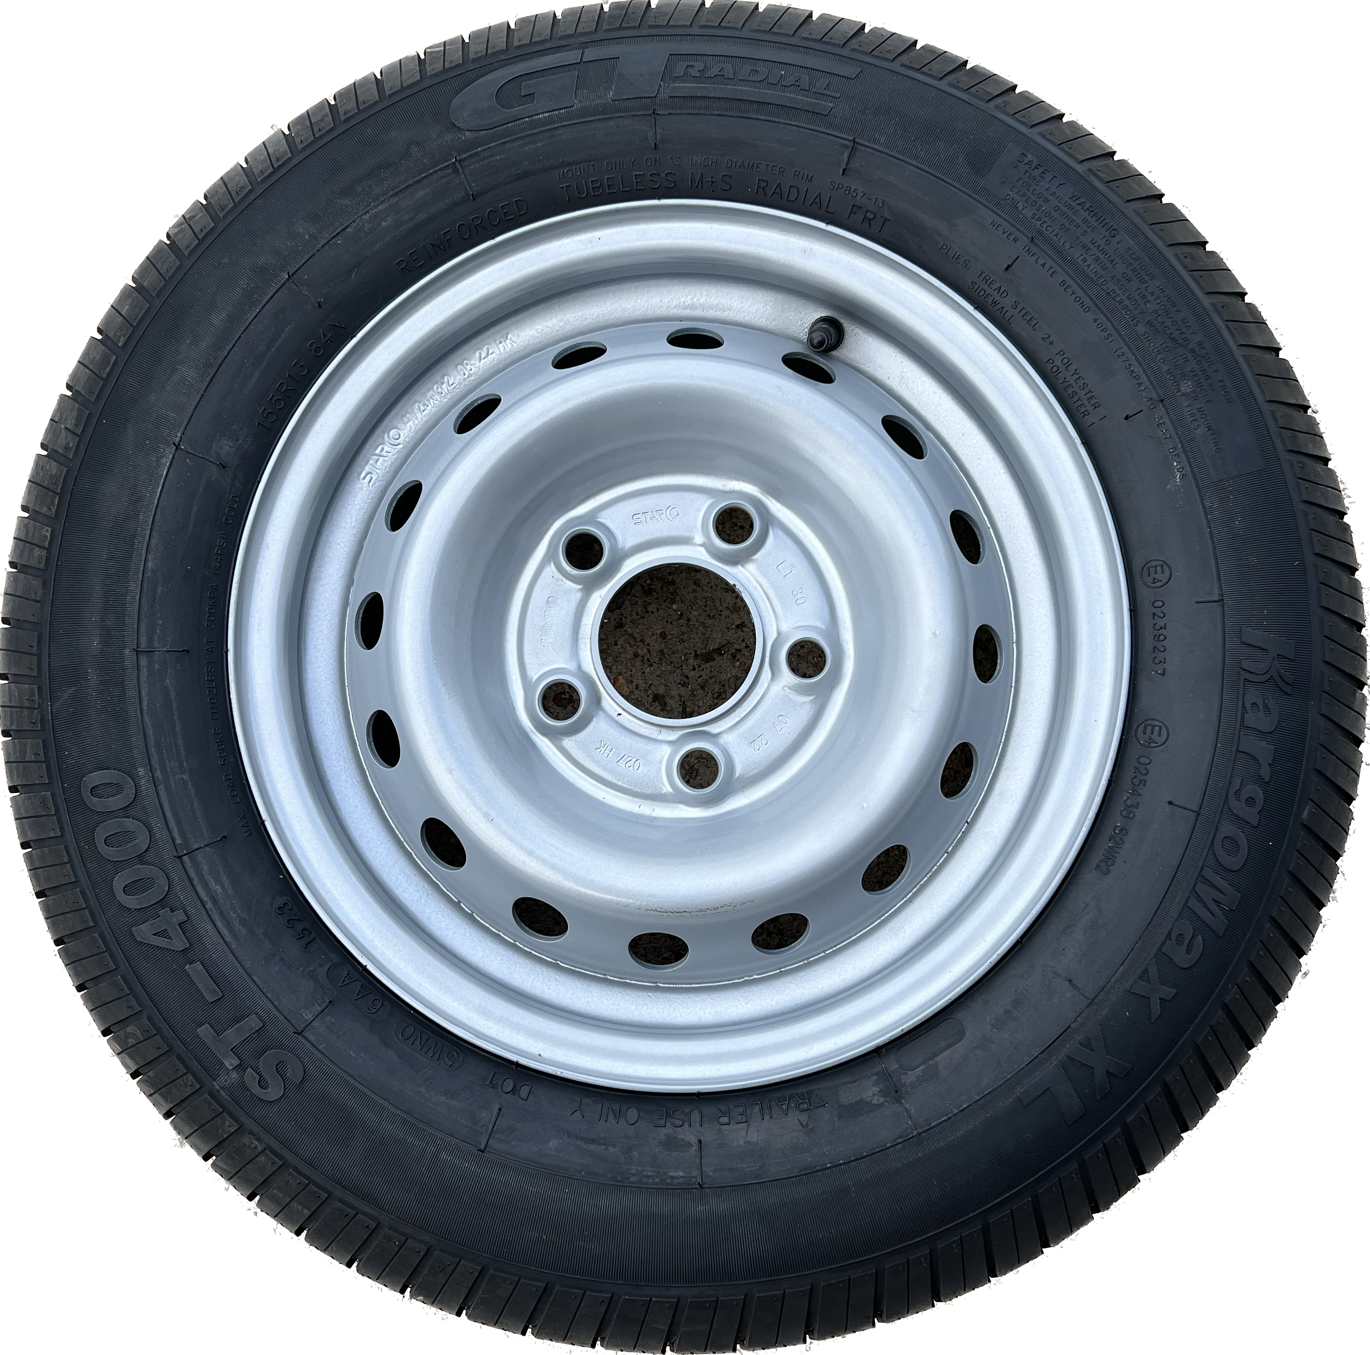 155 R 13 (5 x 112mm pcd) trailer wheel and tyre